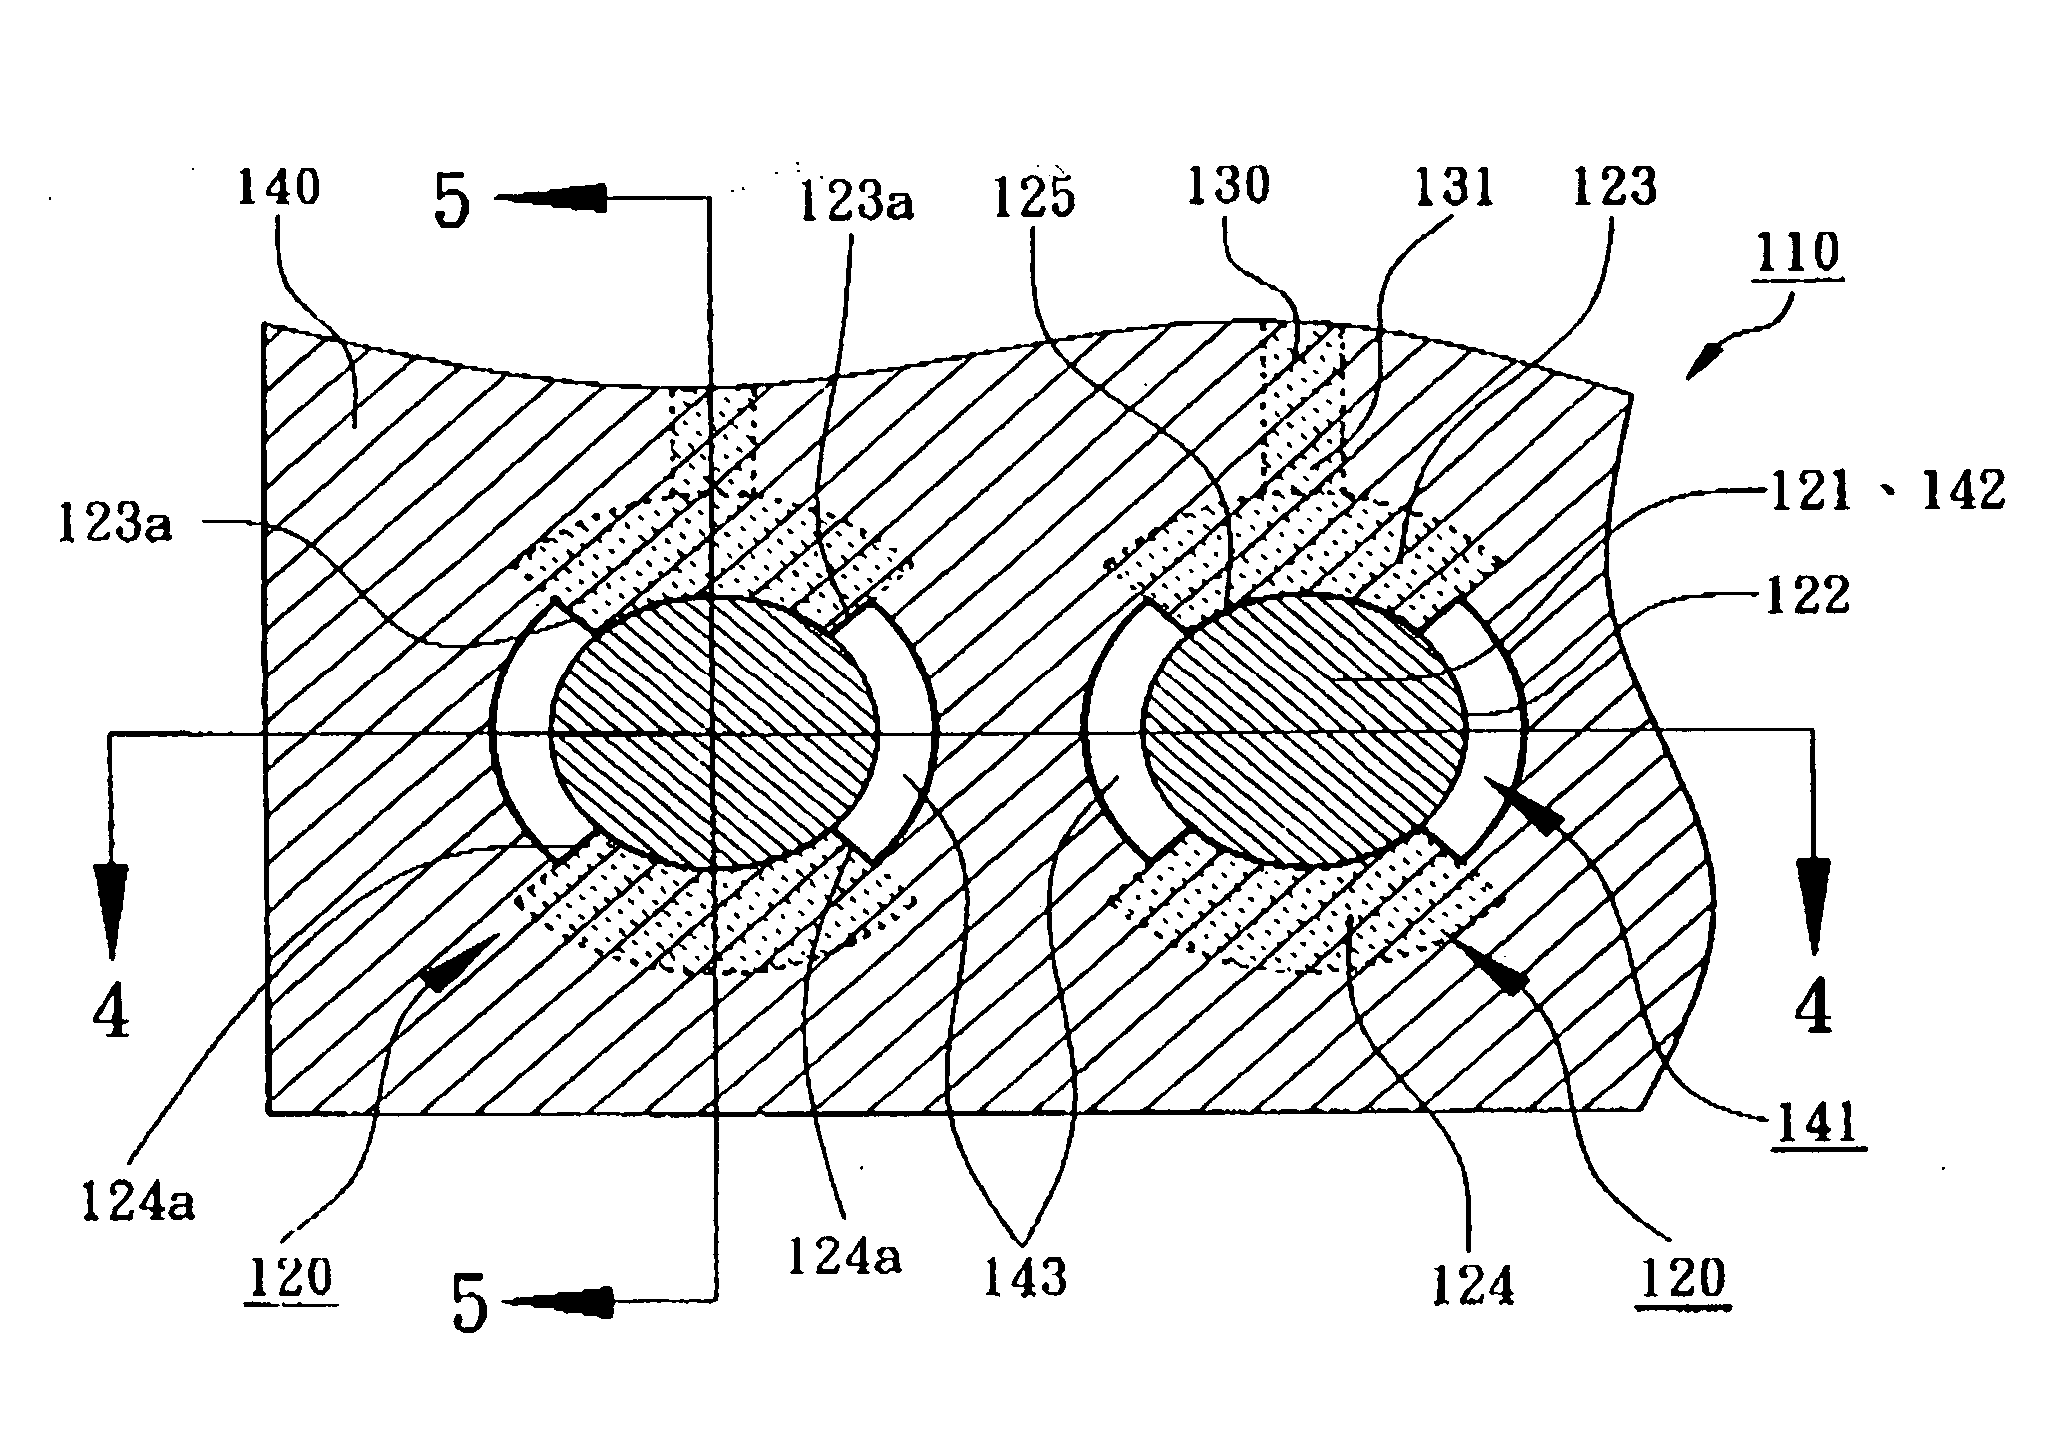 Substrate with reinforced contact pad structure